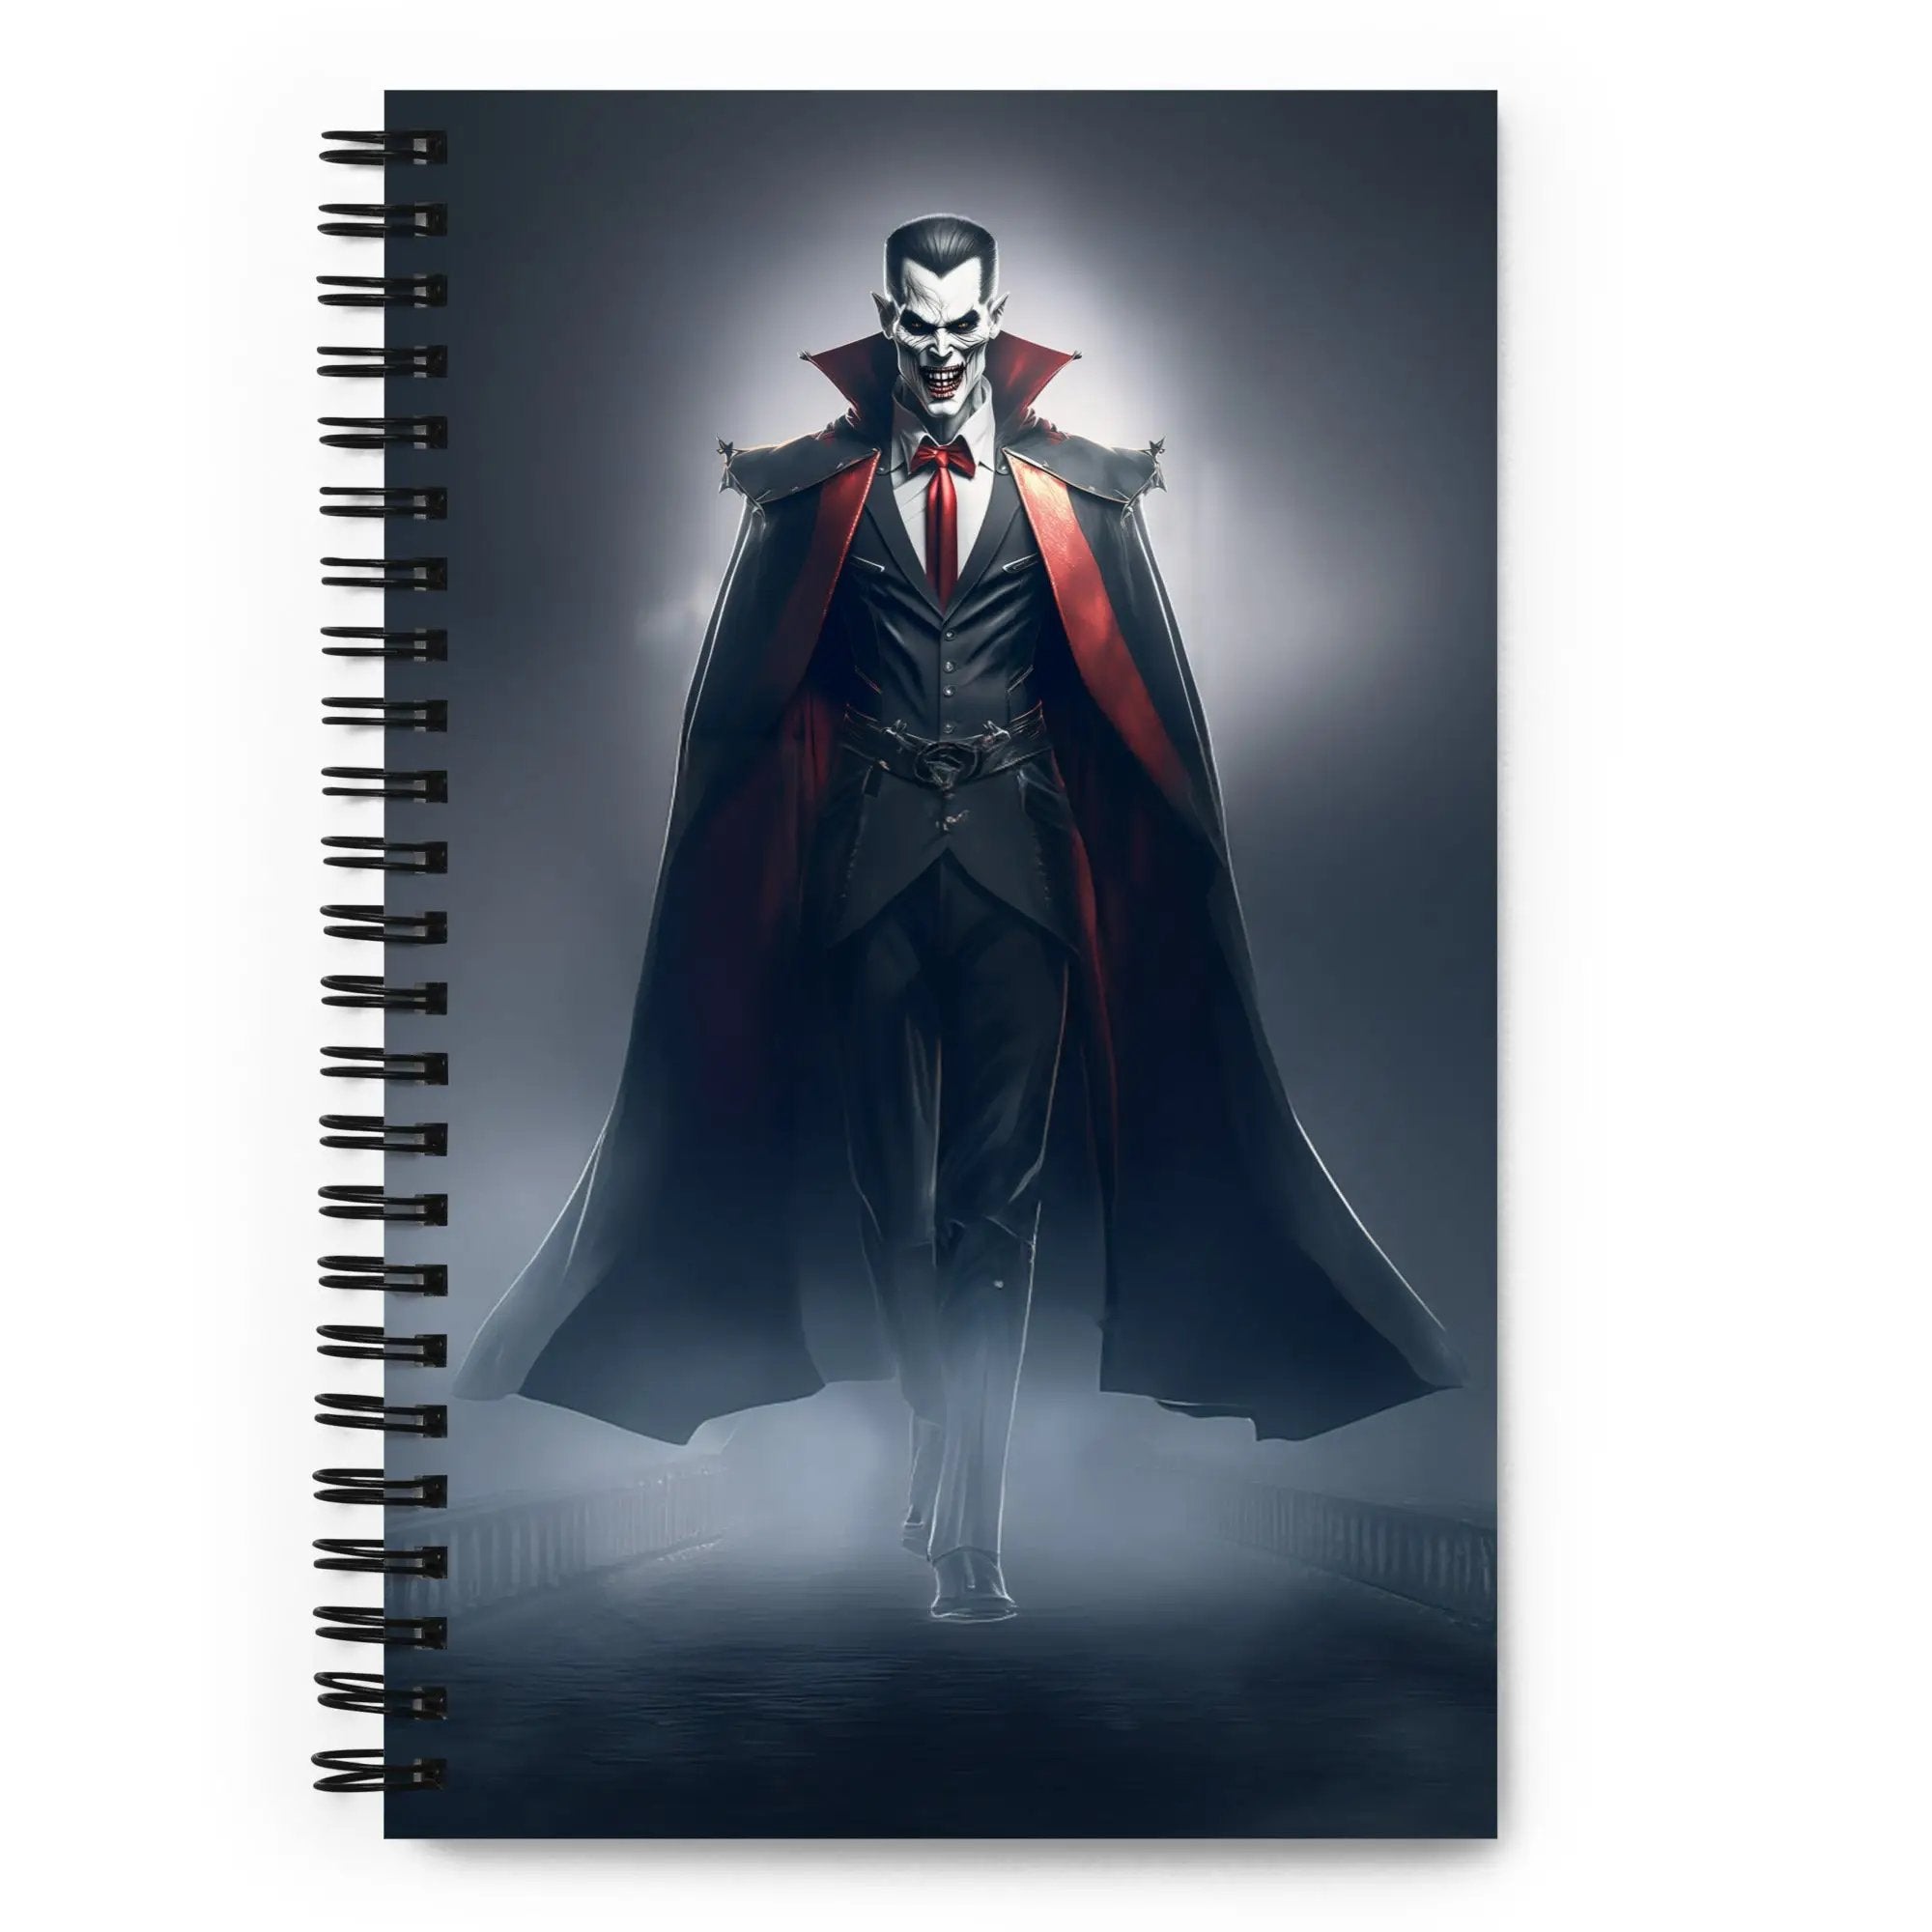 The Monster Squad "Dracula" Spiral notebook